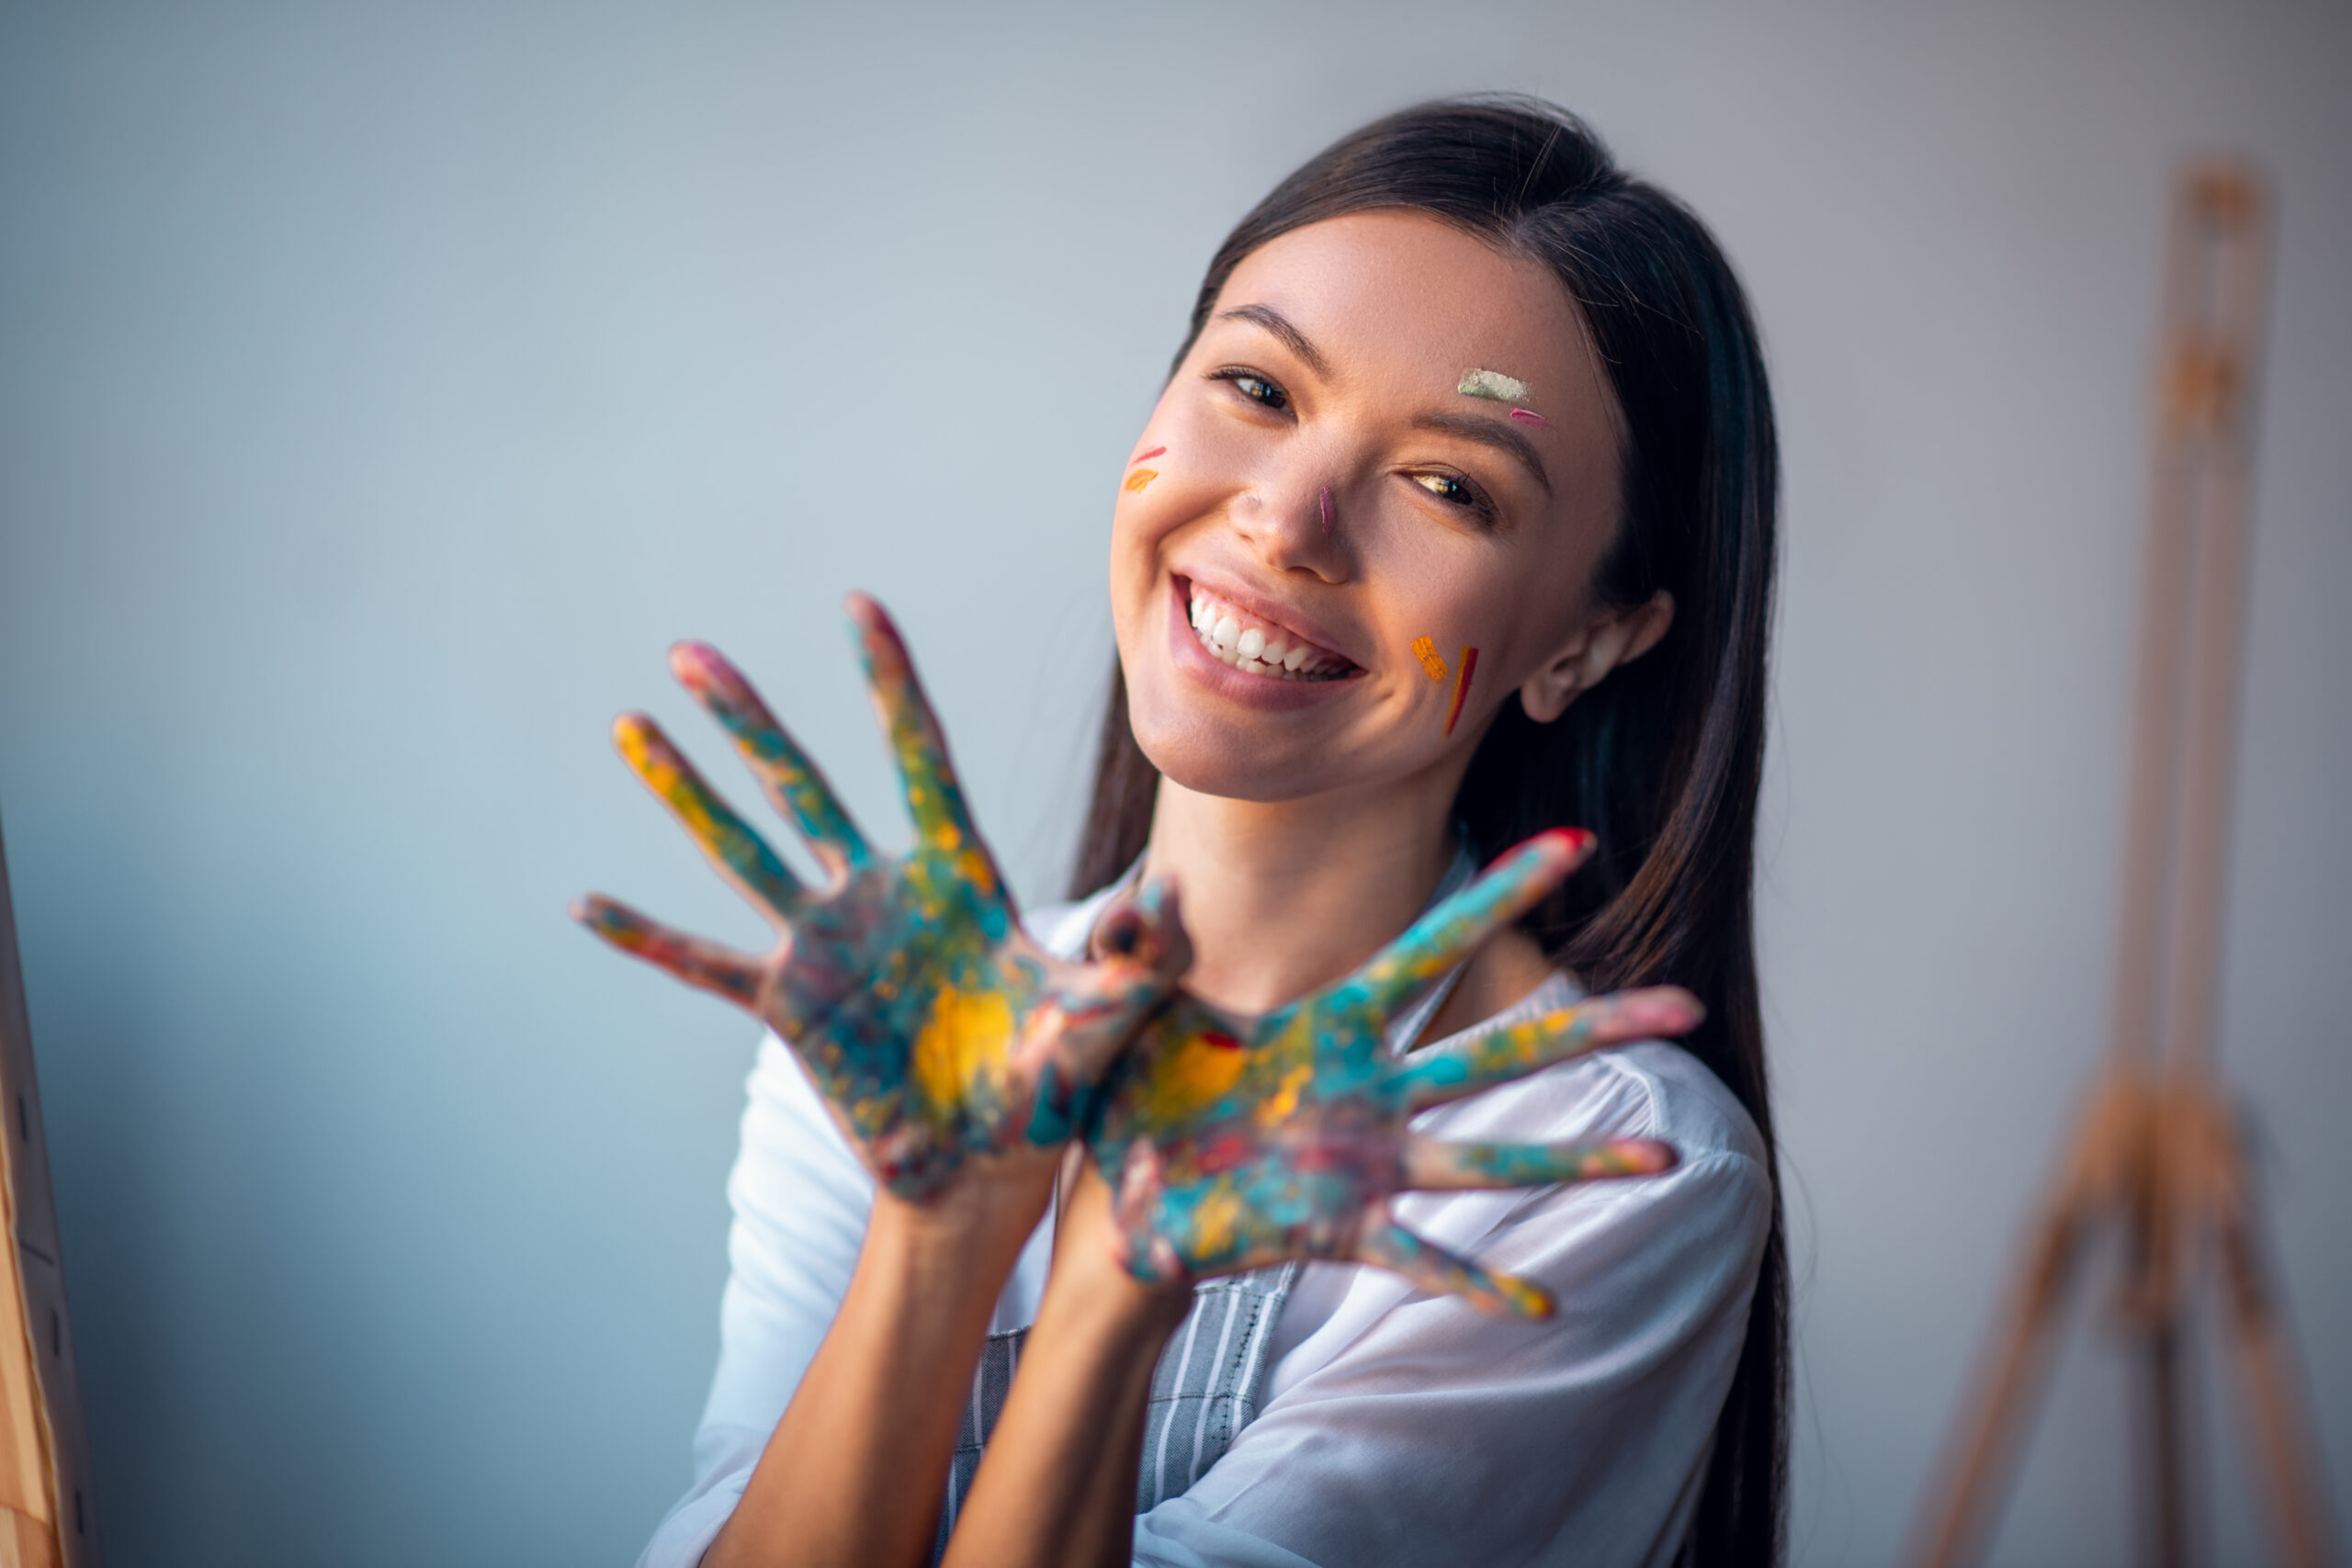 All in paint. Joyful happy woman smiling while showing her hands to you - Cultivating joy